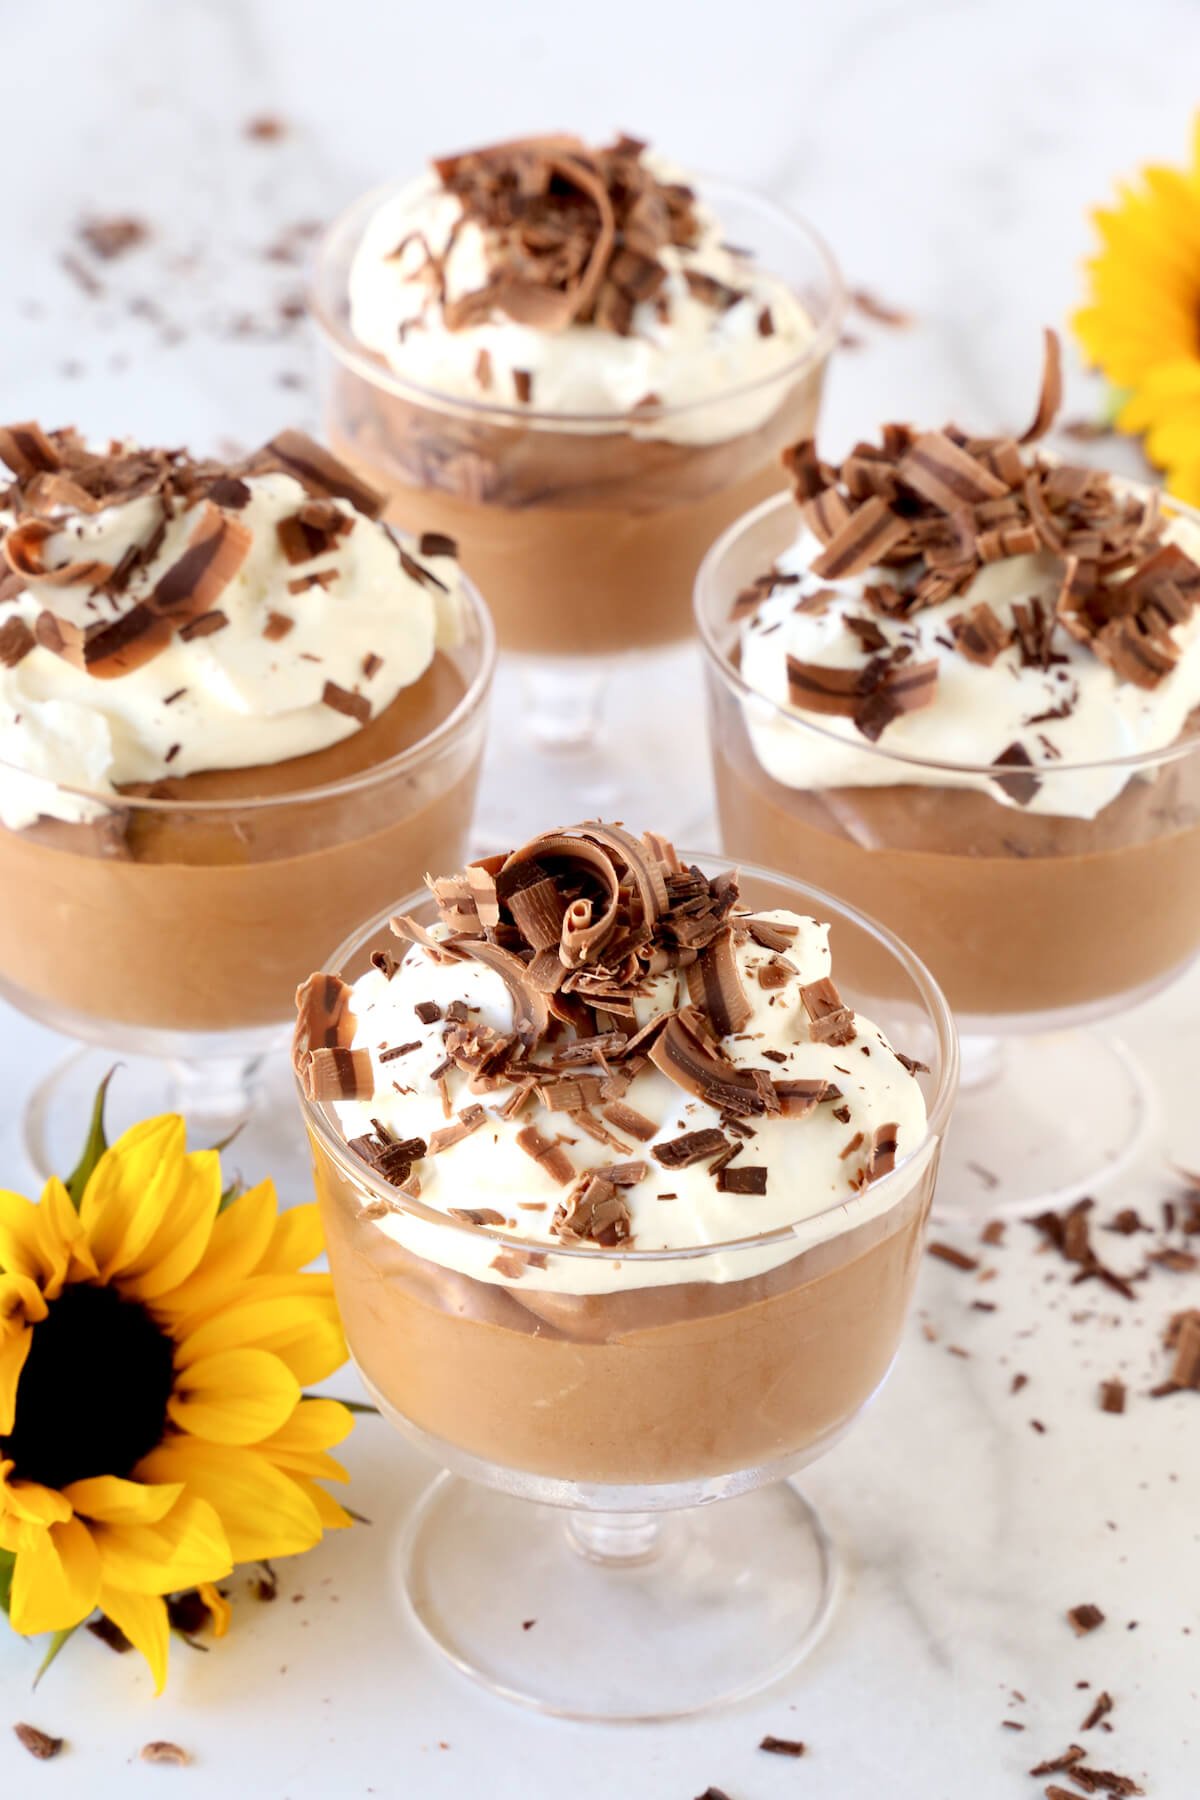 Four clear glass bowls filled with chocolate mousse, whipped cream and chocolate shavings.